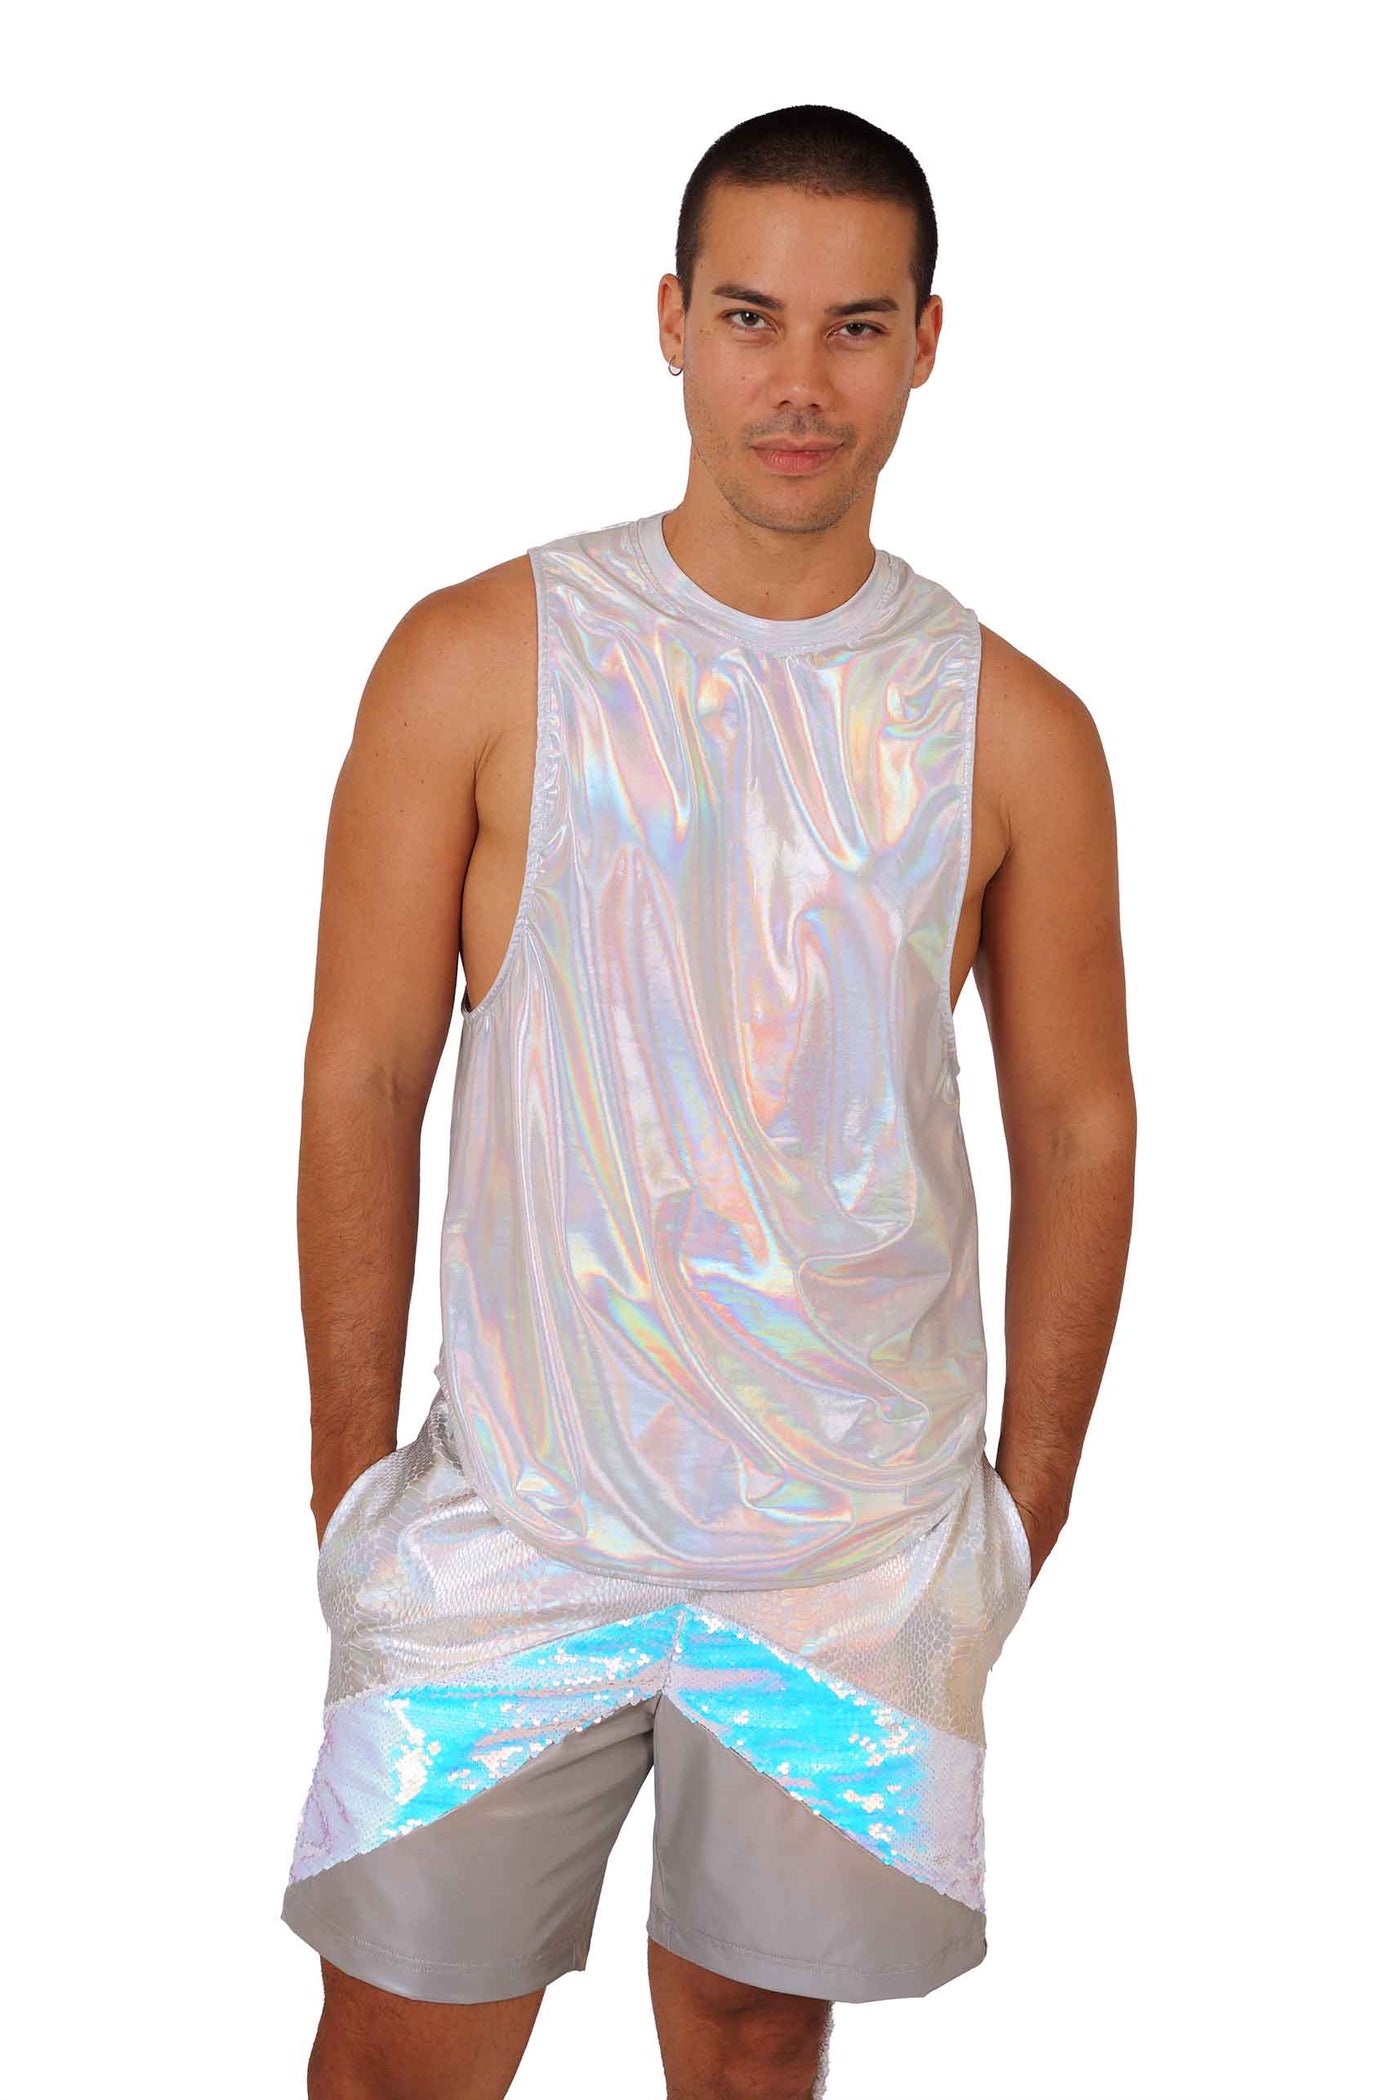 man wearing sequin shorts and a holo tank top from Love Khaos